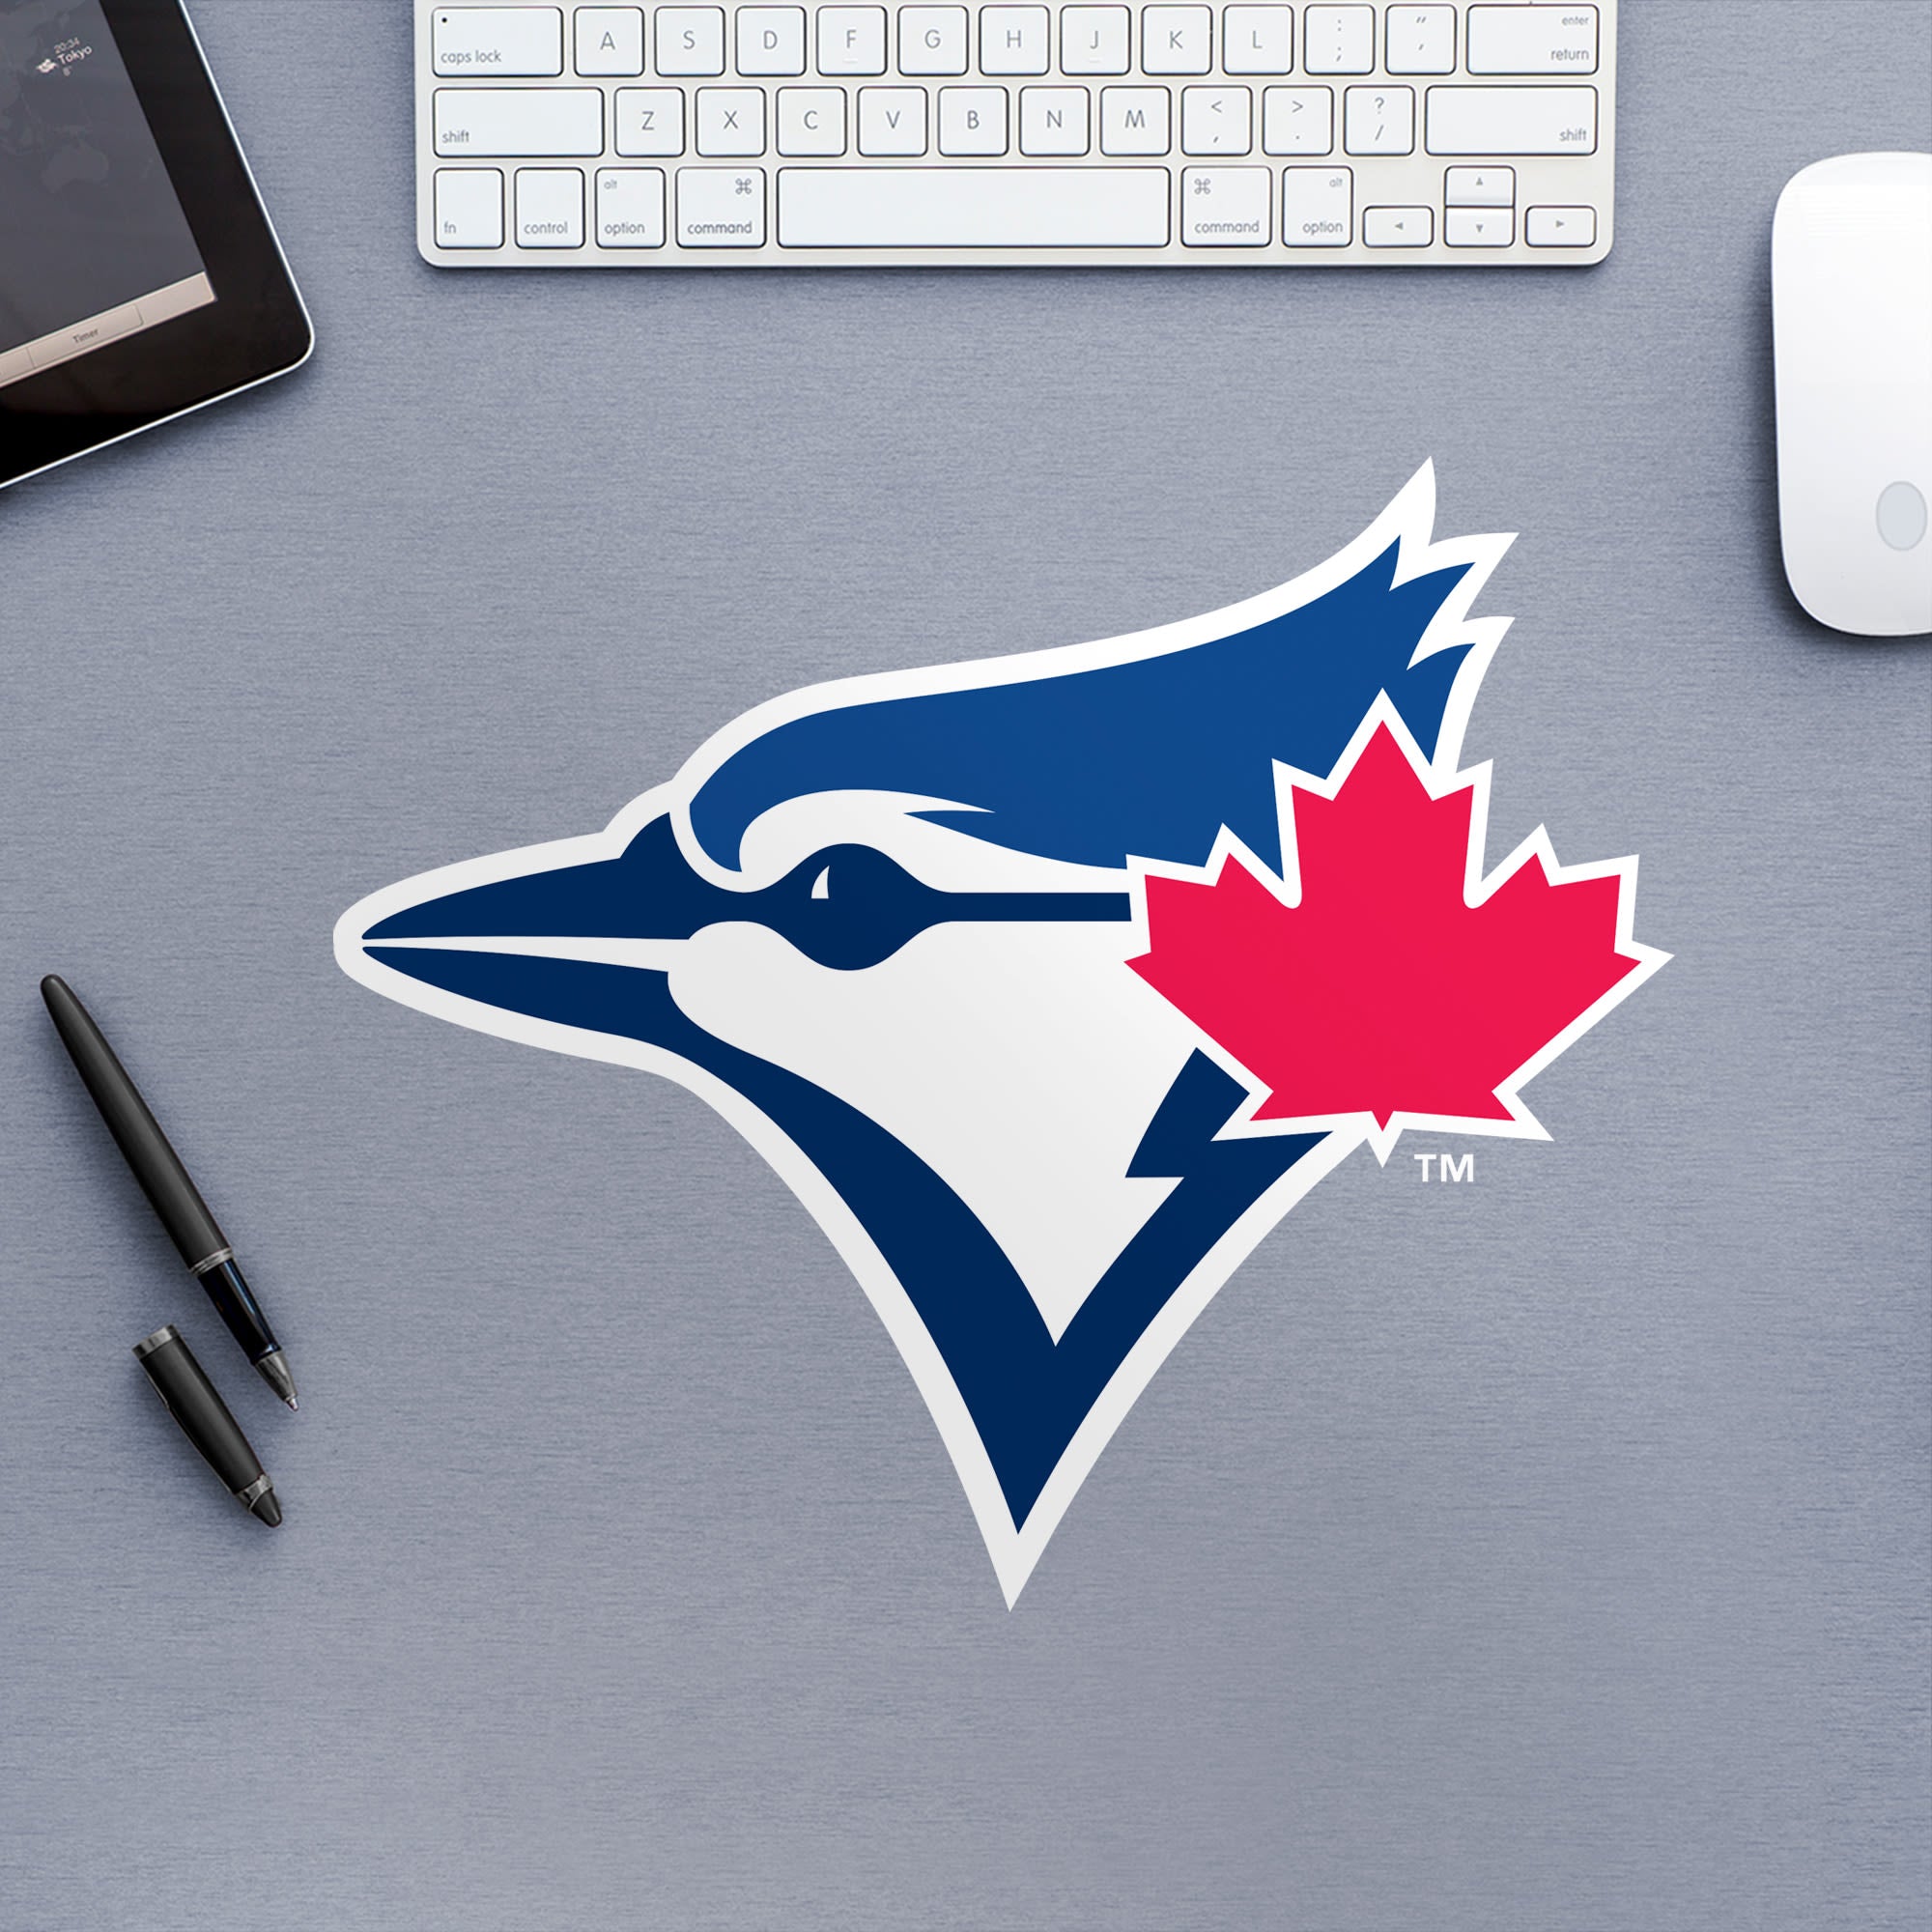 Toronto Blue Jays: Logo - Officially Licensed MLB Removable Wall Decal Large by Fathead | Vinyl